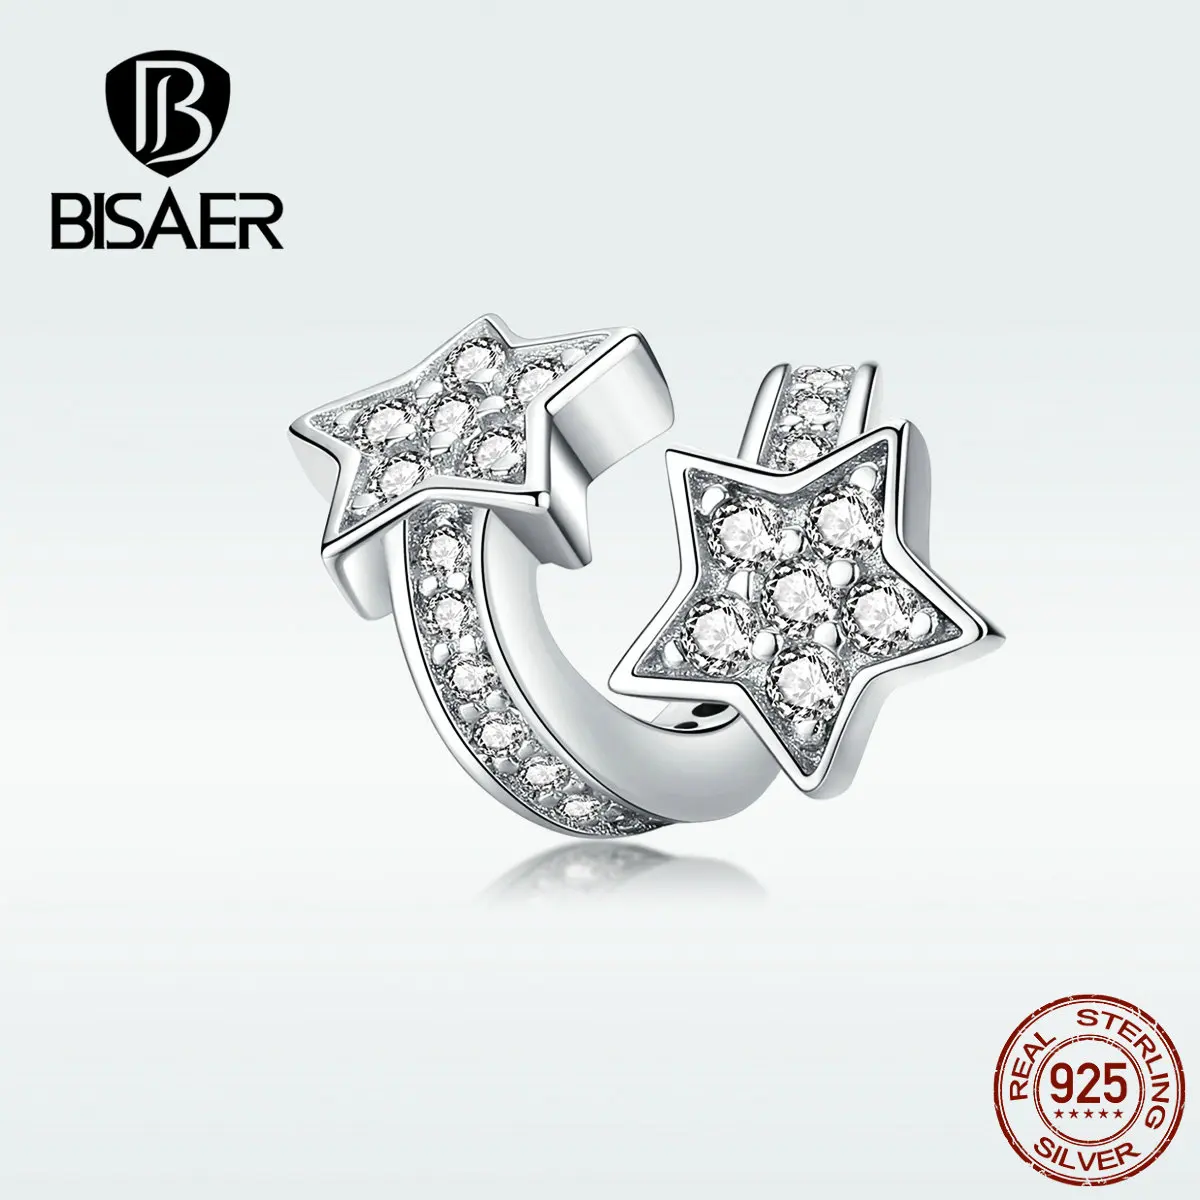 BISAER Luminous Star Clear Cubic Zircon 925 Sterling Silver Star Beads Charms fit Women Bracelets Silver 925 Jewelry ECC1244